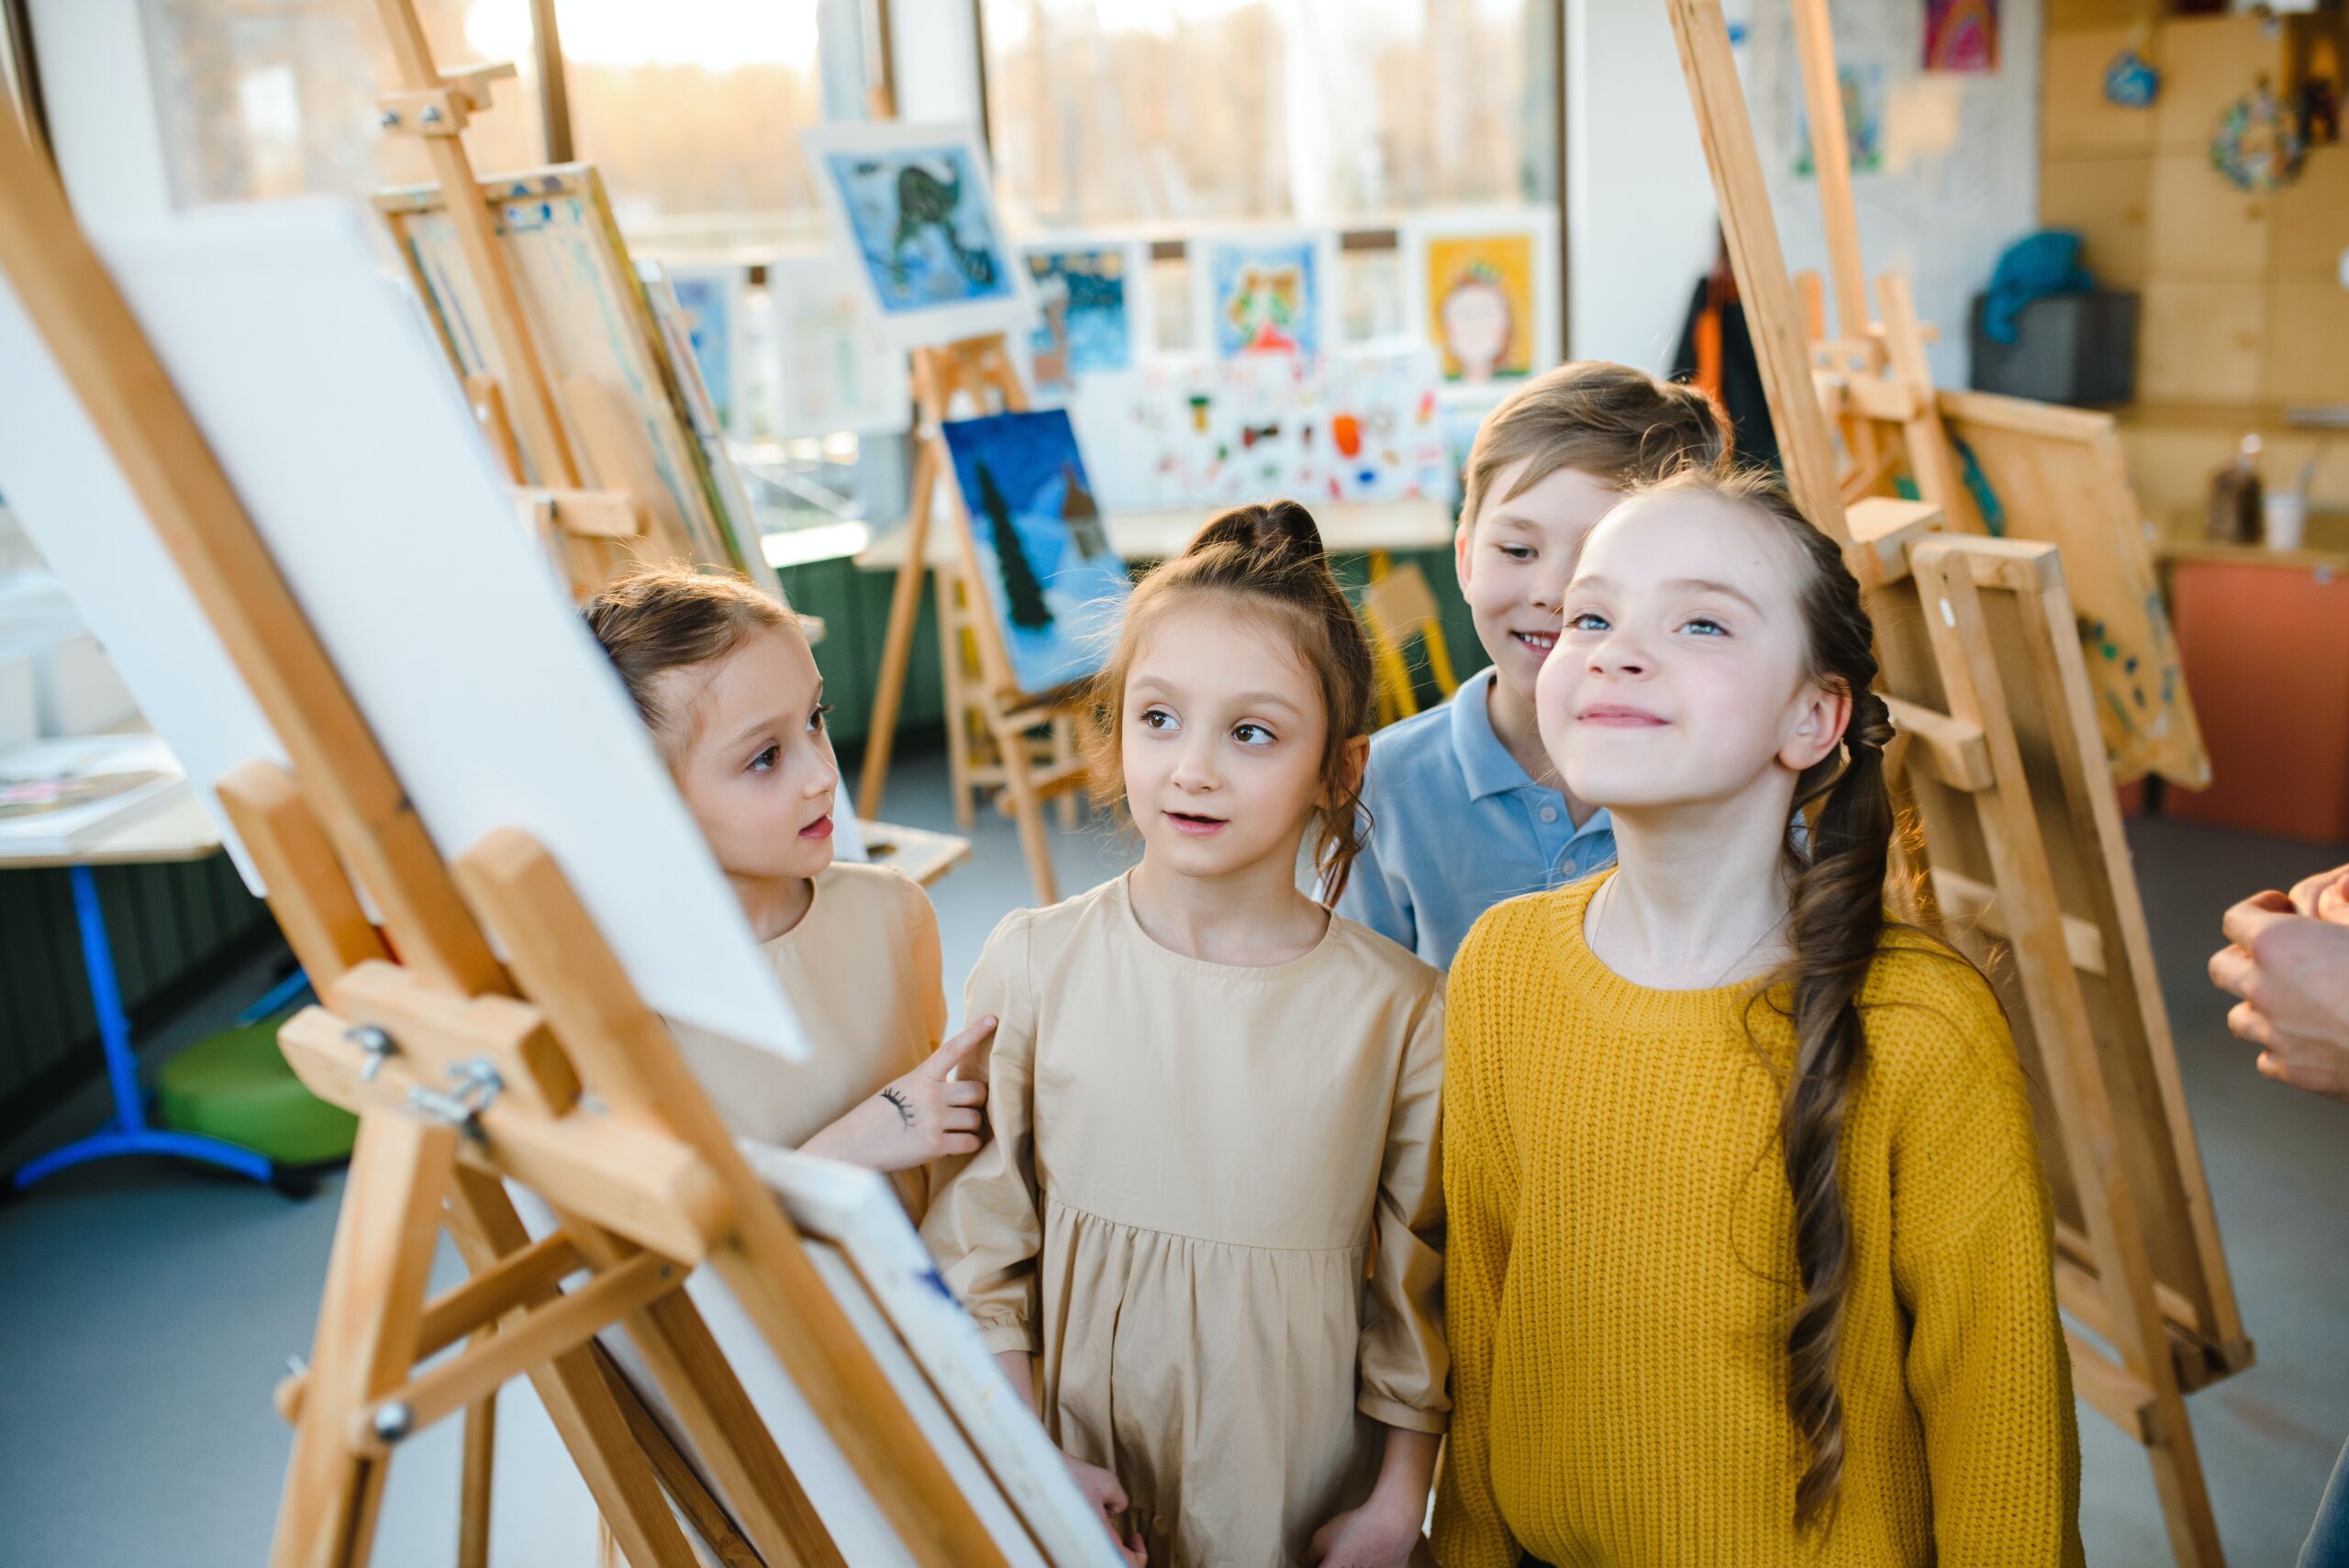 Four young children standing next to an easel in a classroom